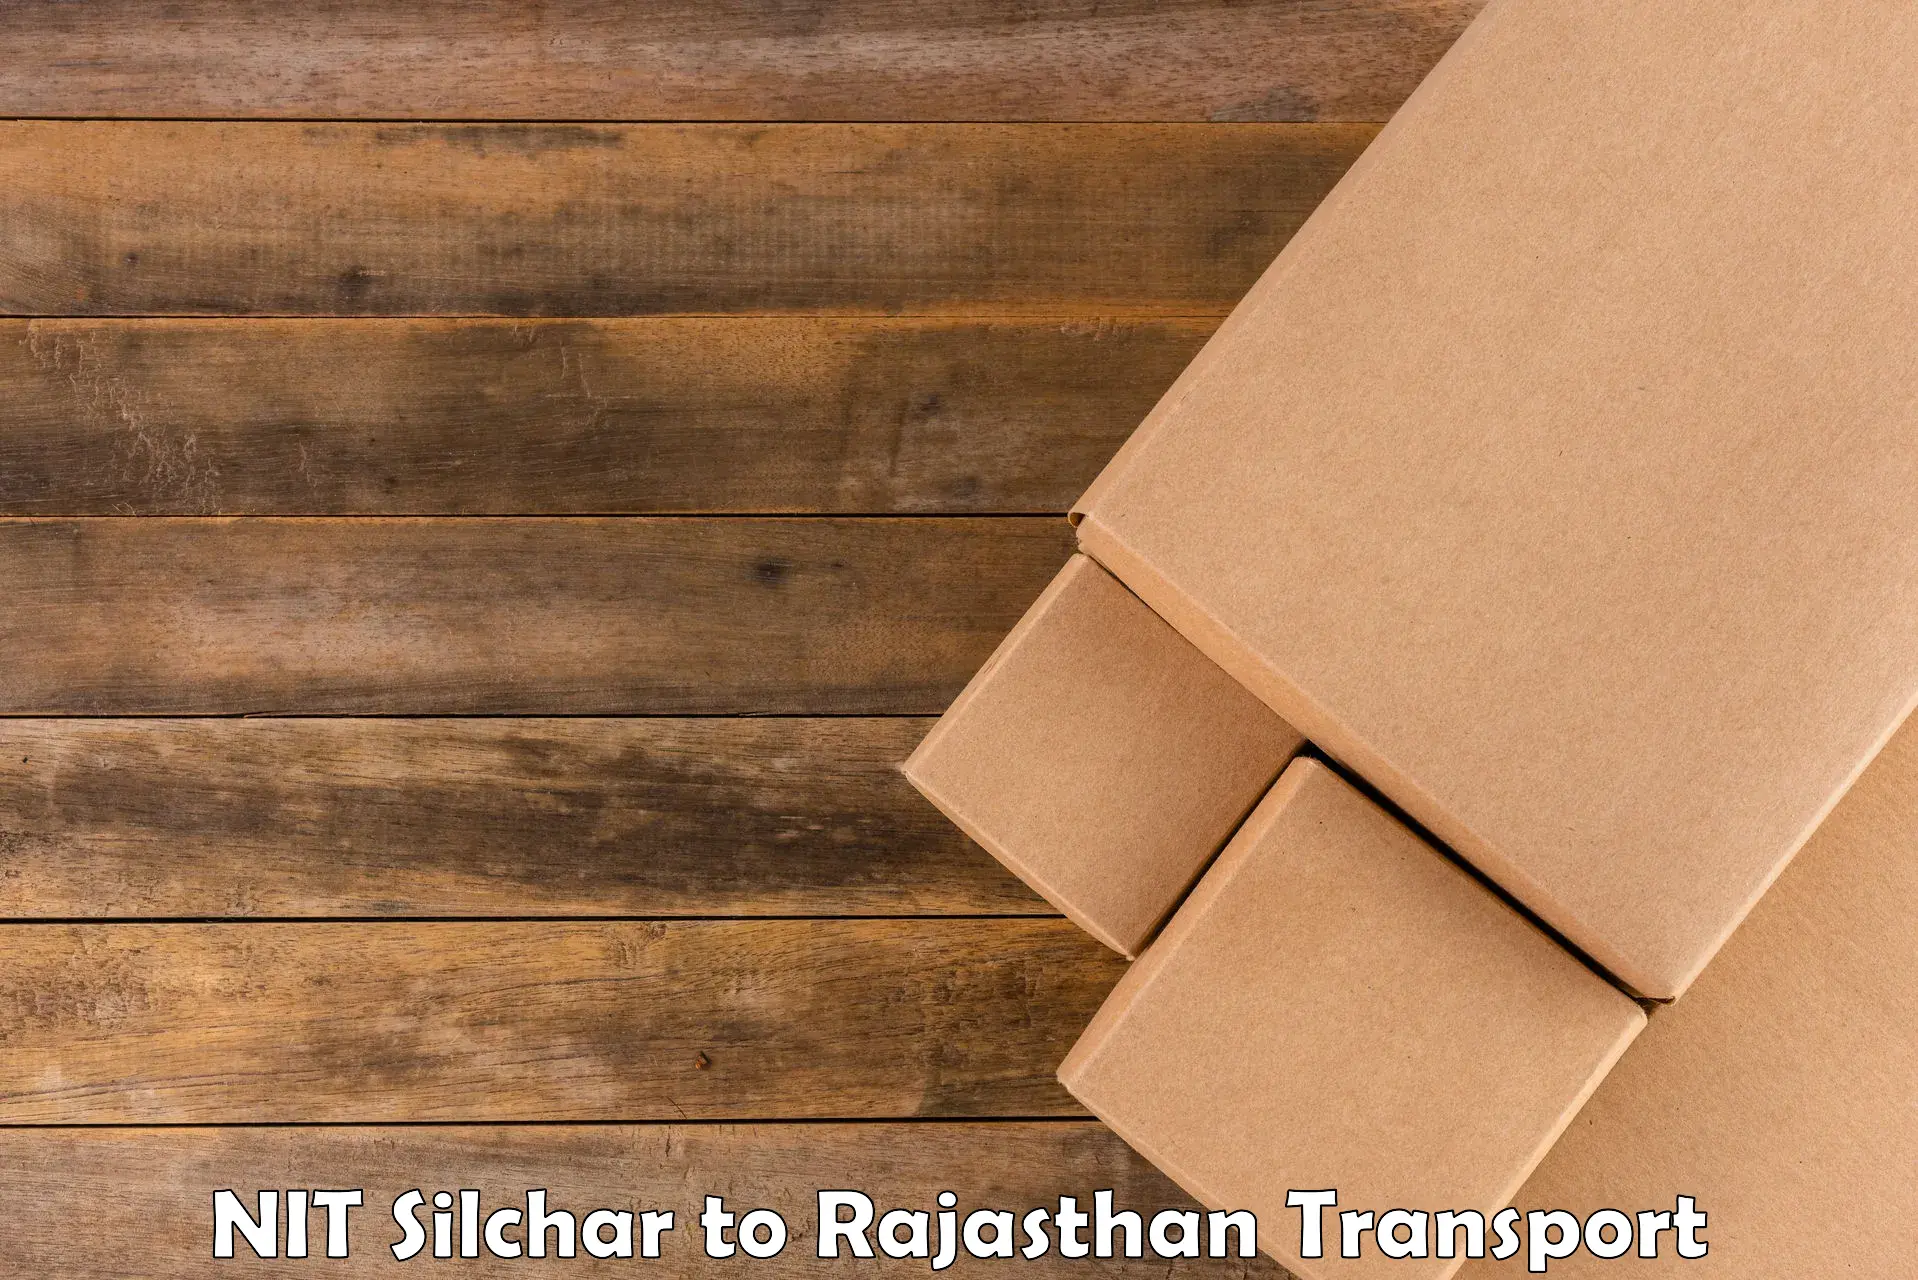 Air cargo transport services NIT Silchar to Behror